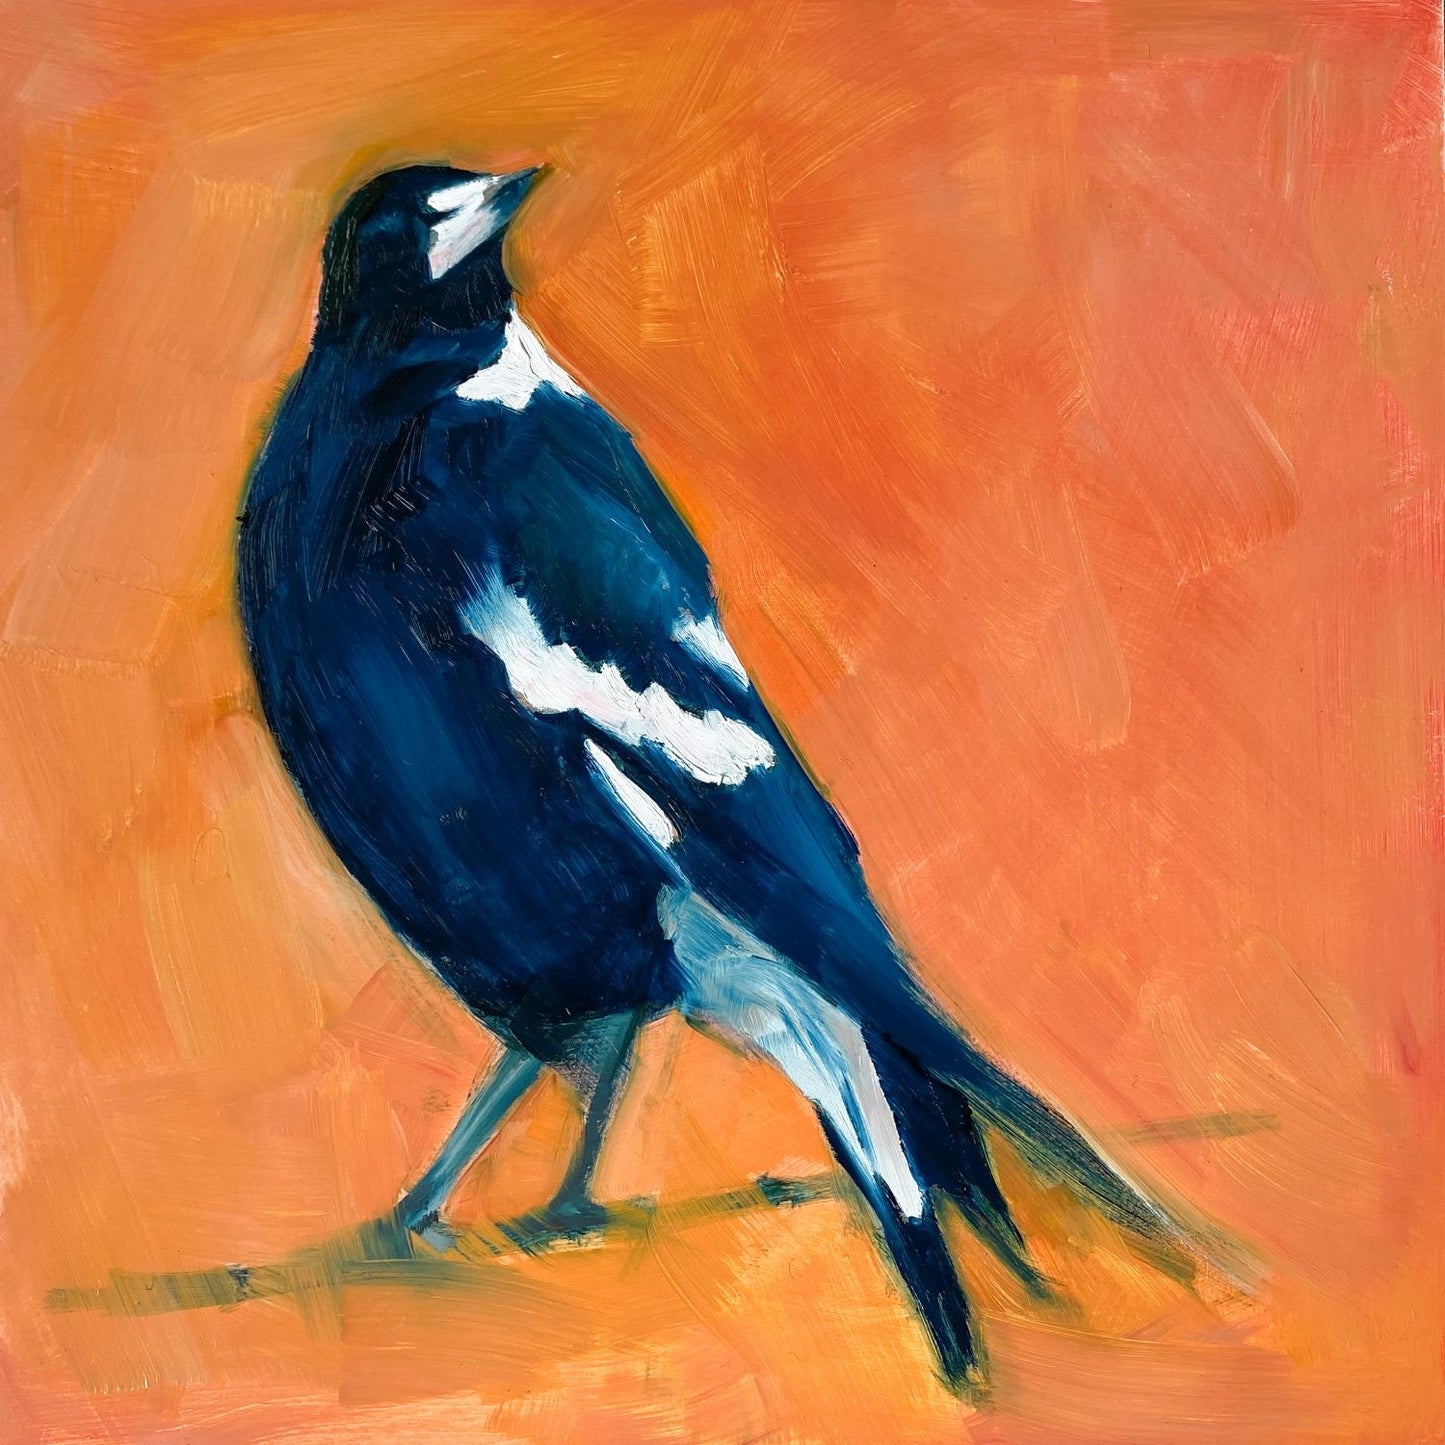 image of an impressionistic oil painting of a navy blue and white magpie looking up on a bright and textured orange background